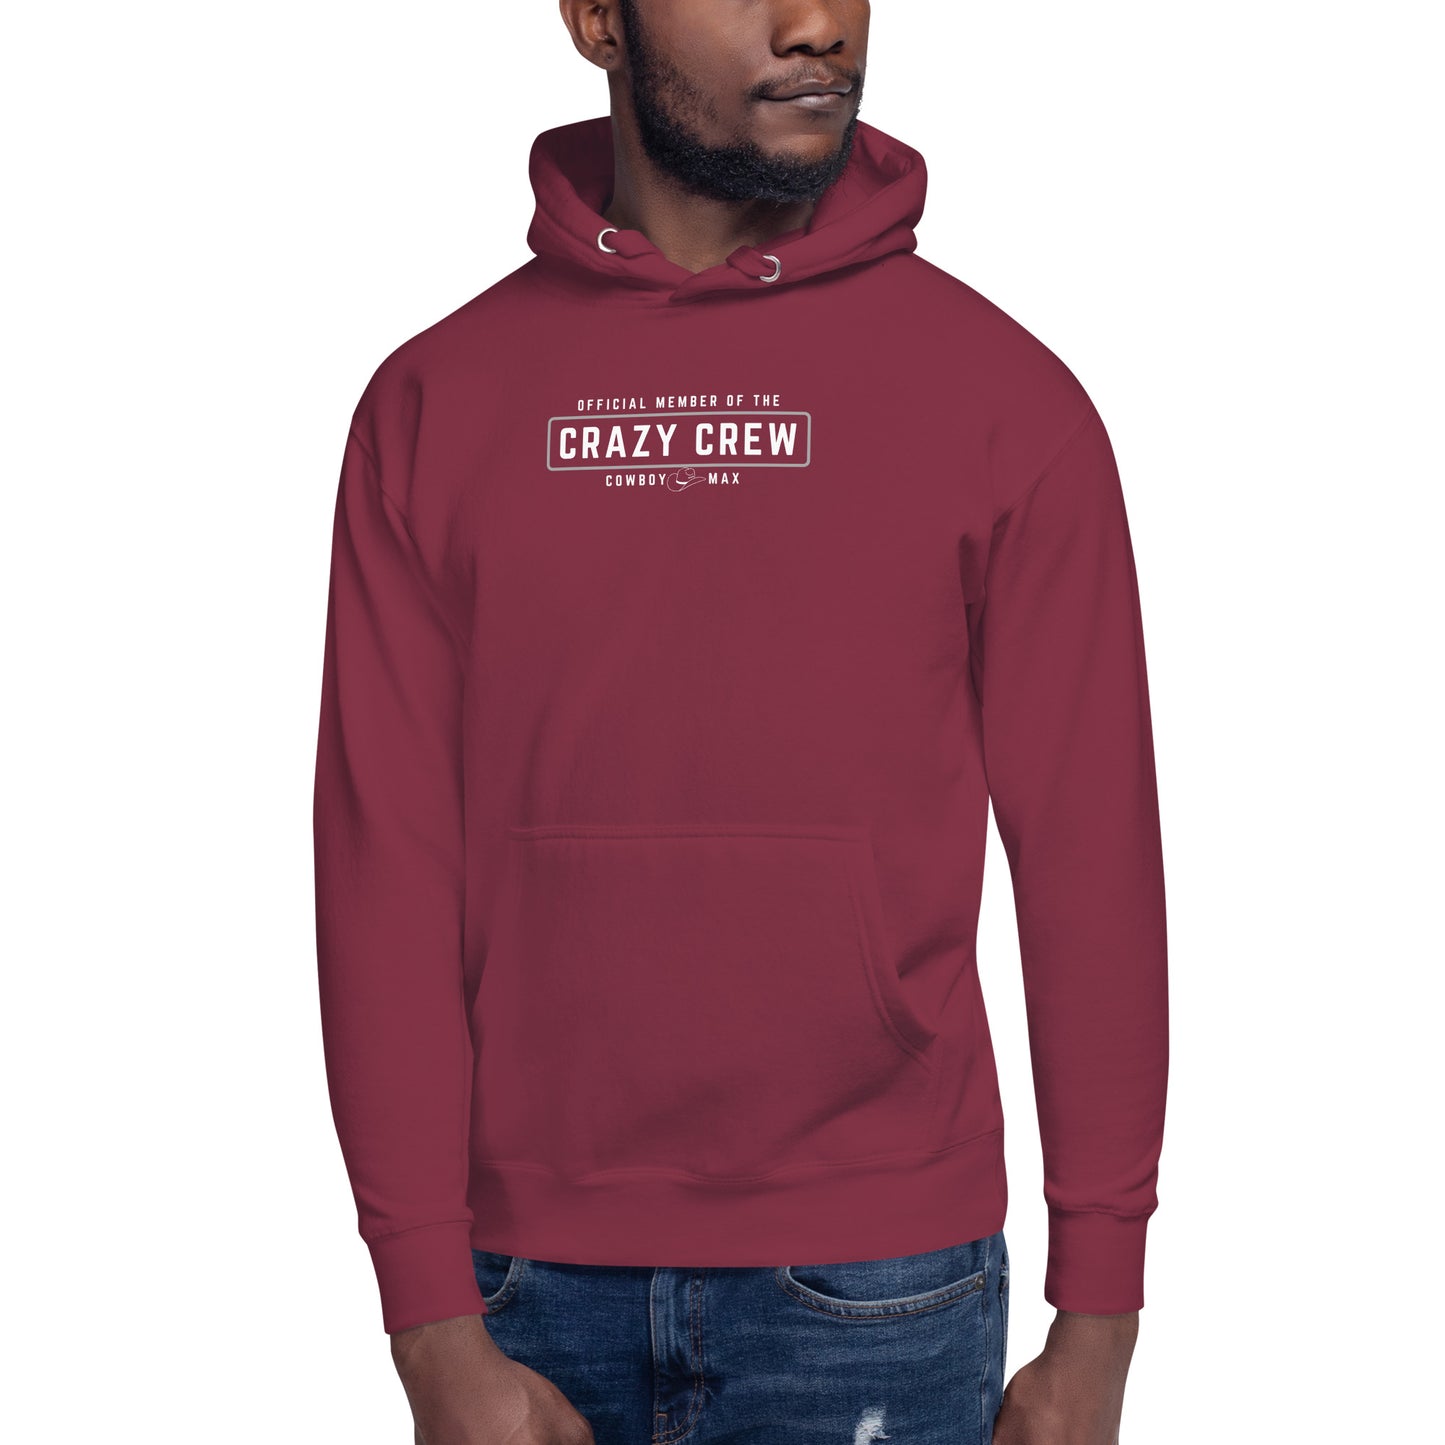 a. Official Member Of The Crazy Crew: Unisex Hoodie